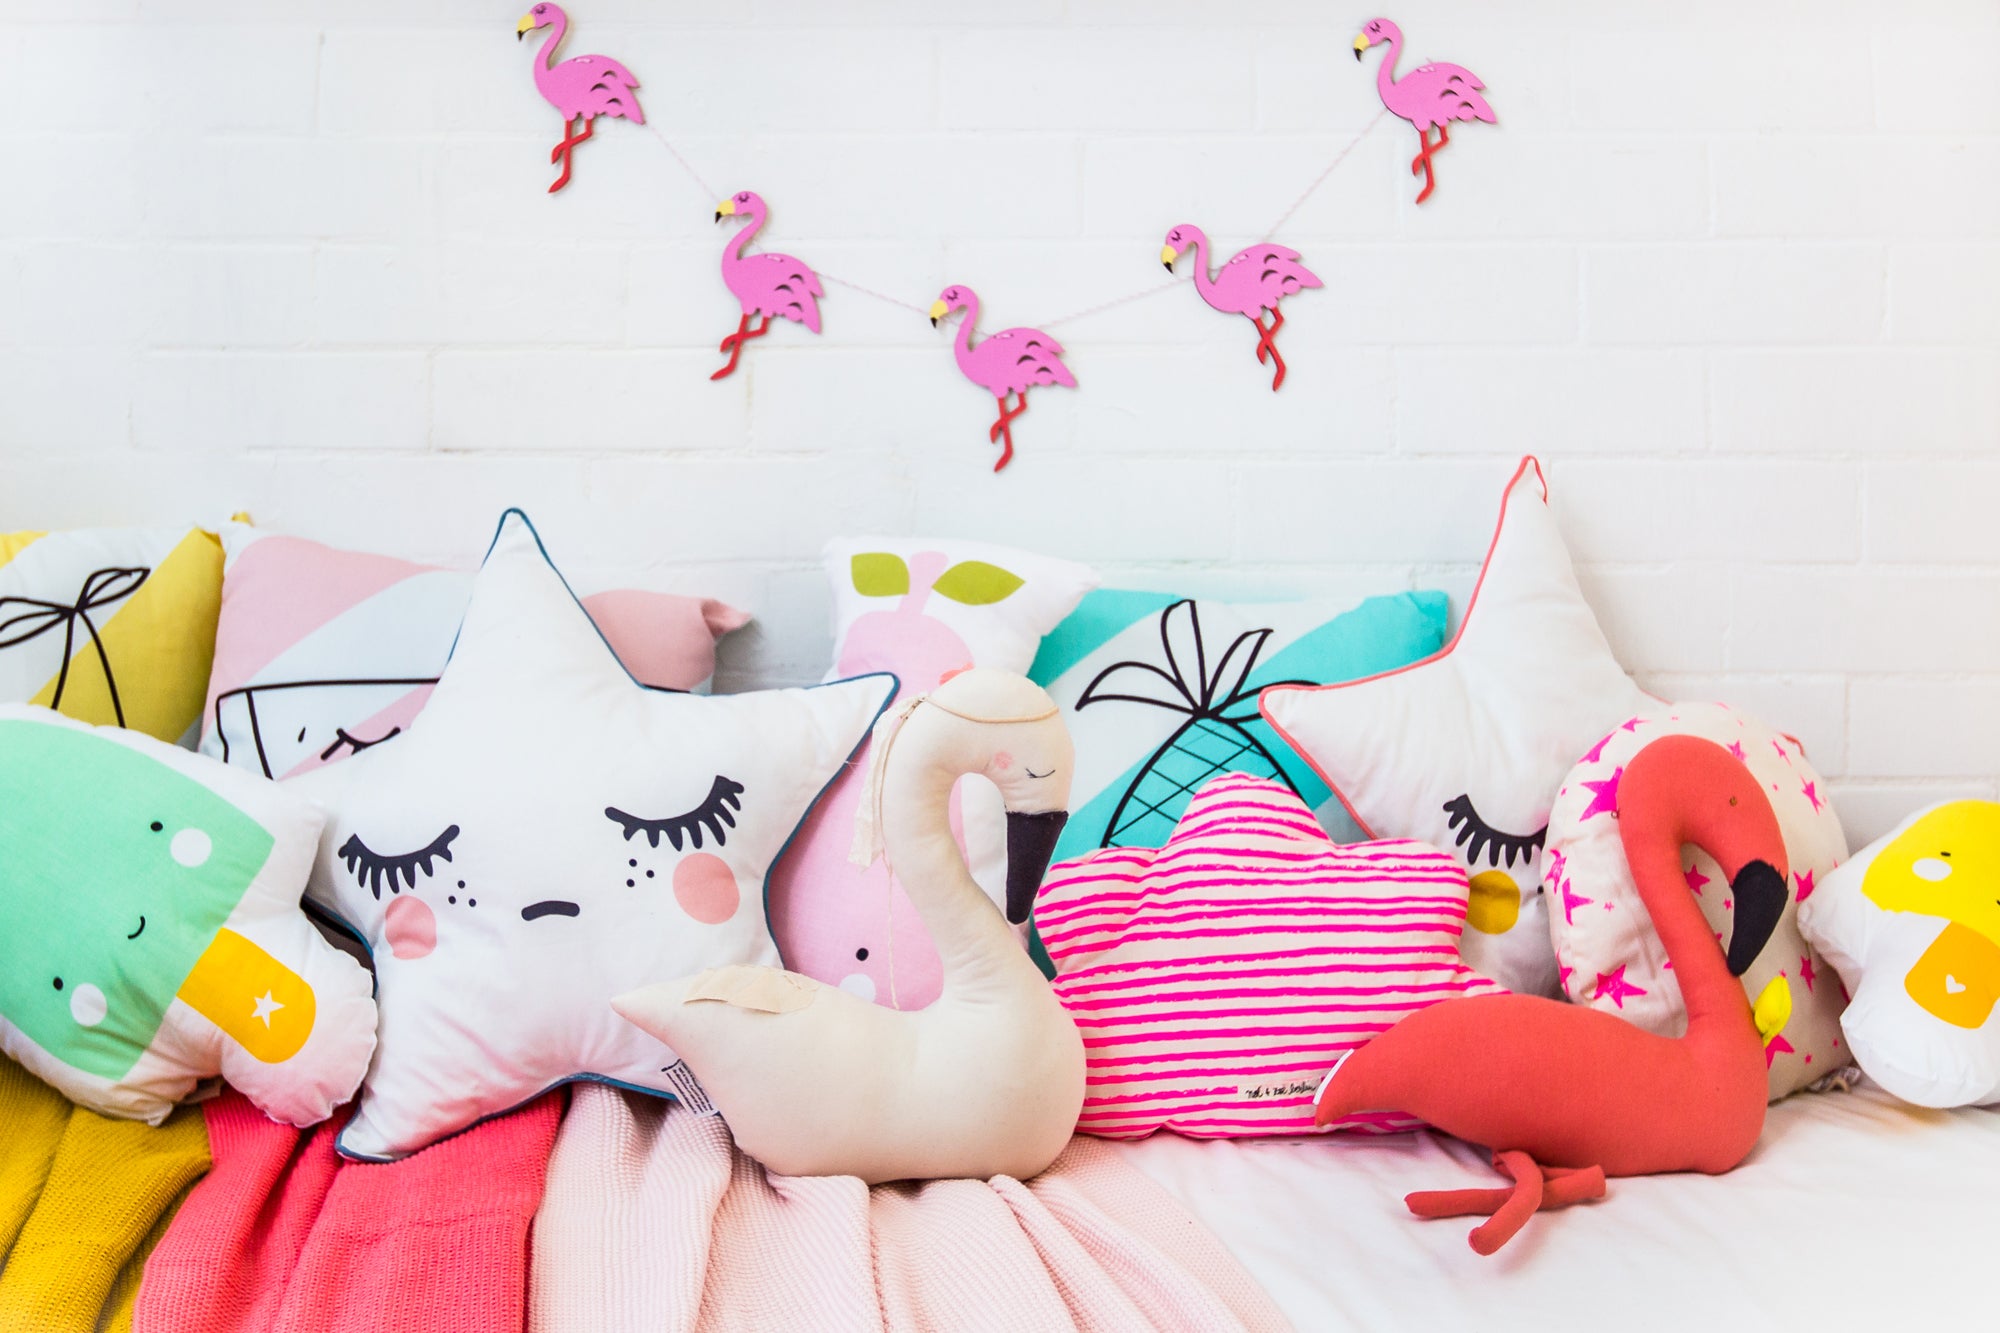 Cushions and Flamingo Garland, all available at Bobby Rabbit (room styling by Bobby Rabbit).